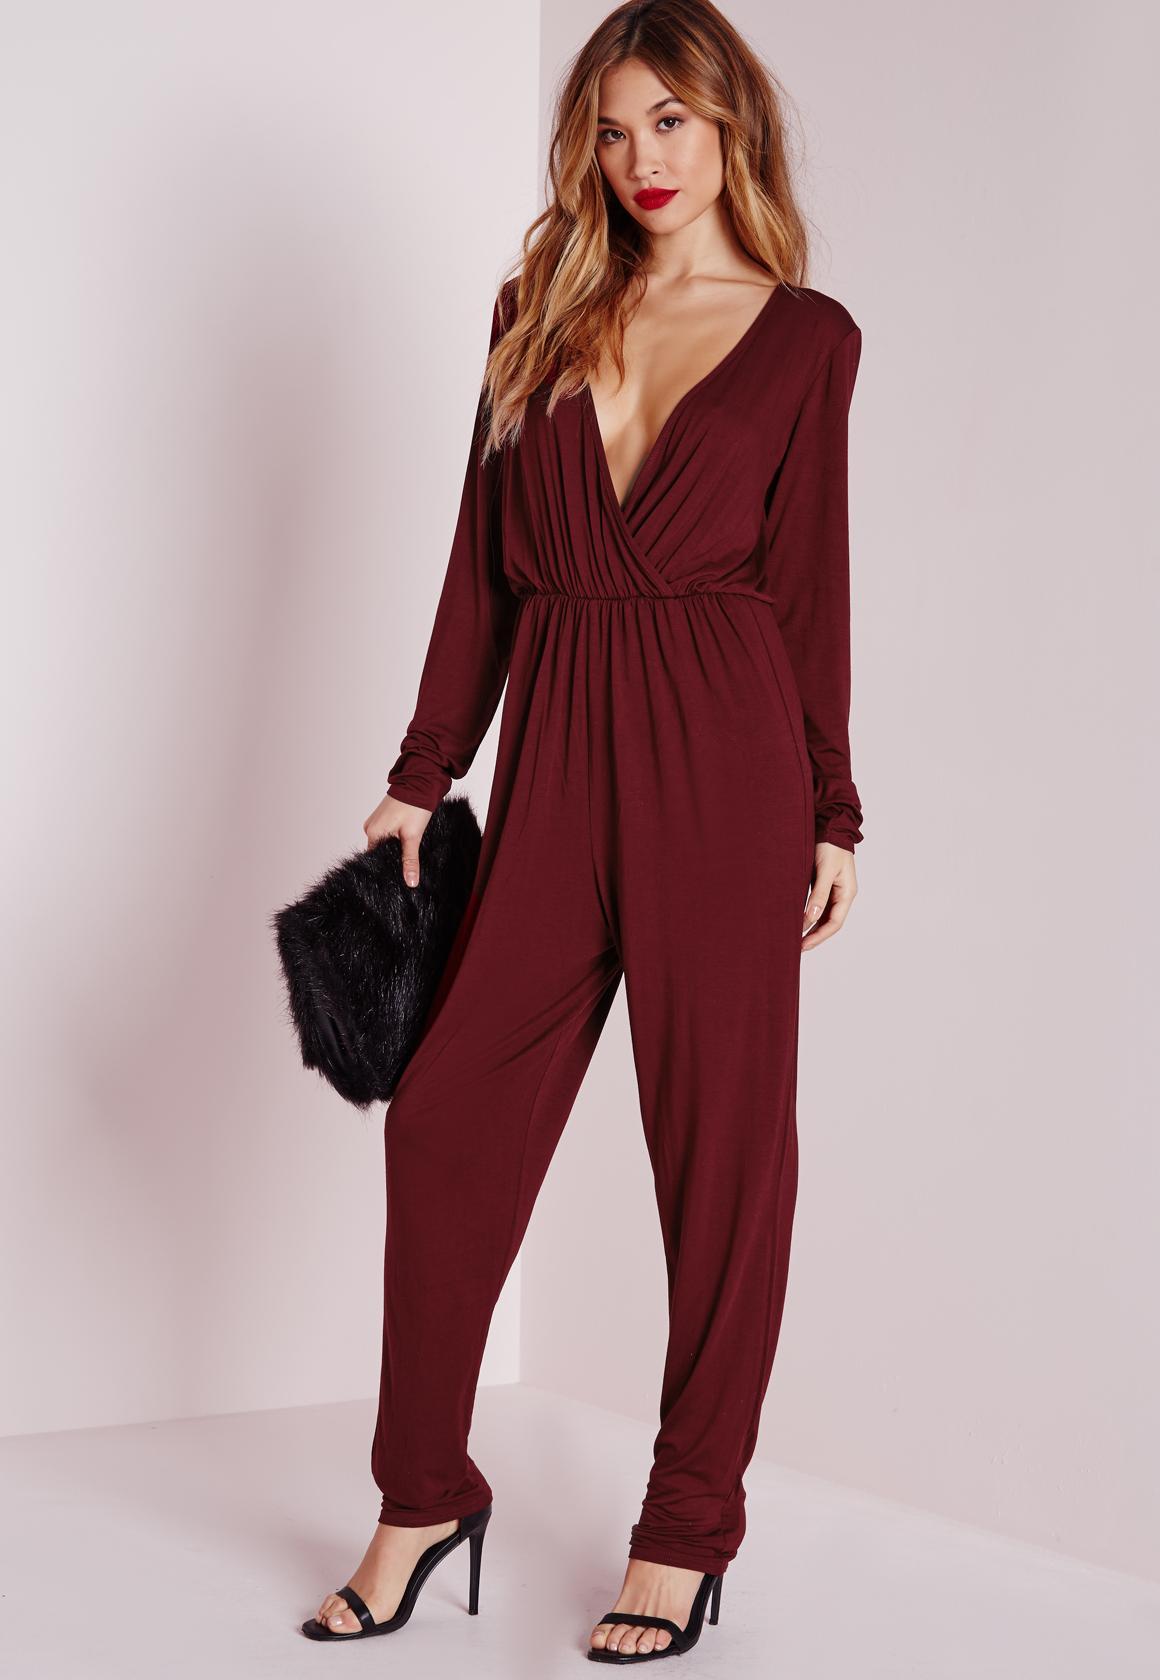 Lyst - Missguided Wrap Long Sleeve Jumpsuit Burgundy in Red